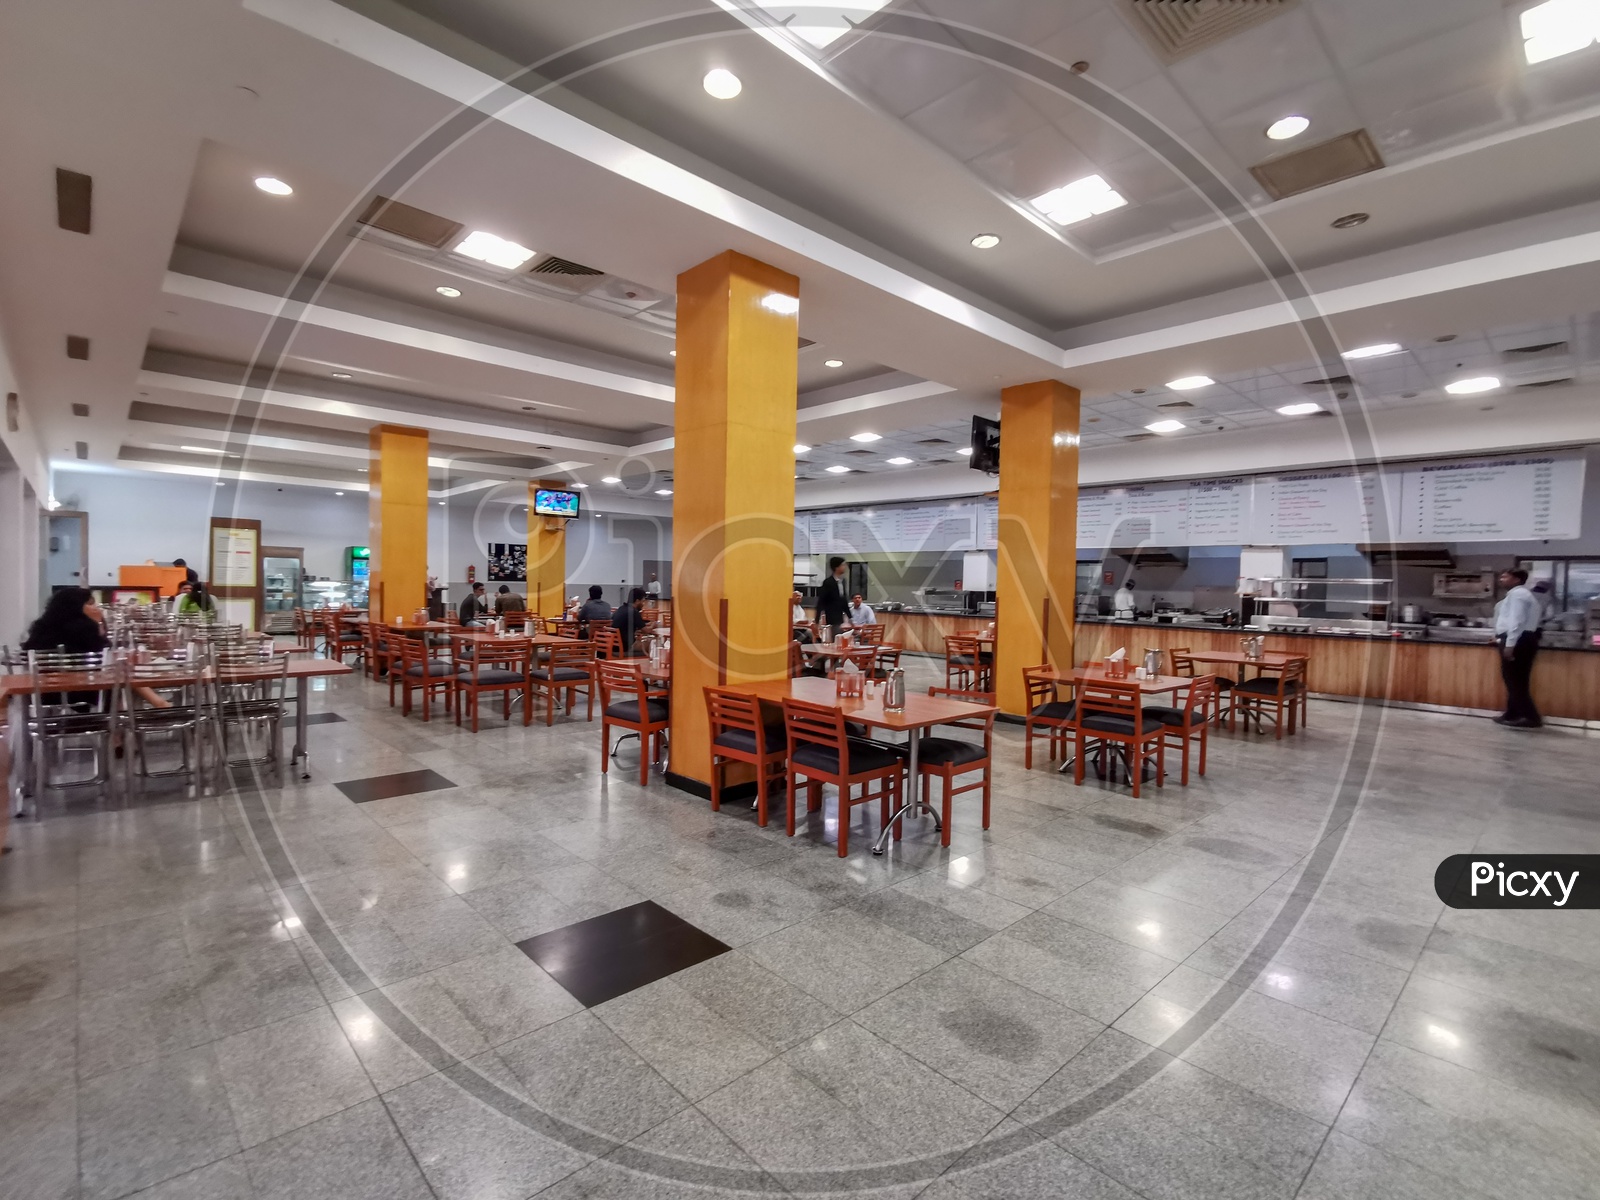 Goel Dining Hall in ISB (Indian School of Business) Campus